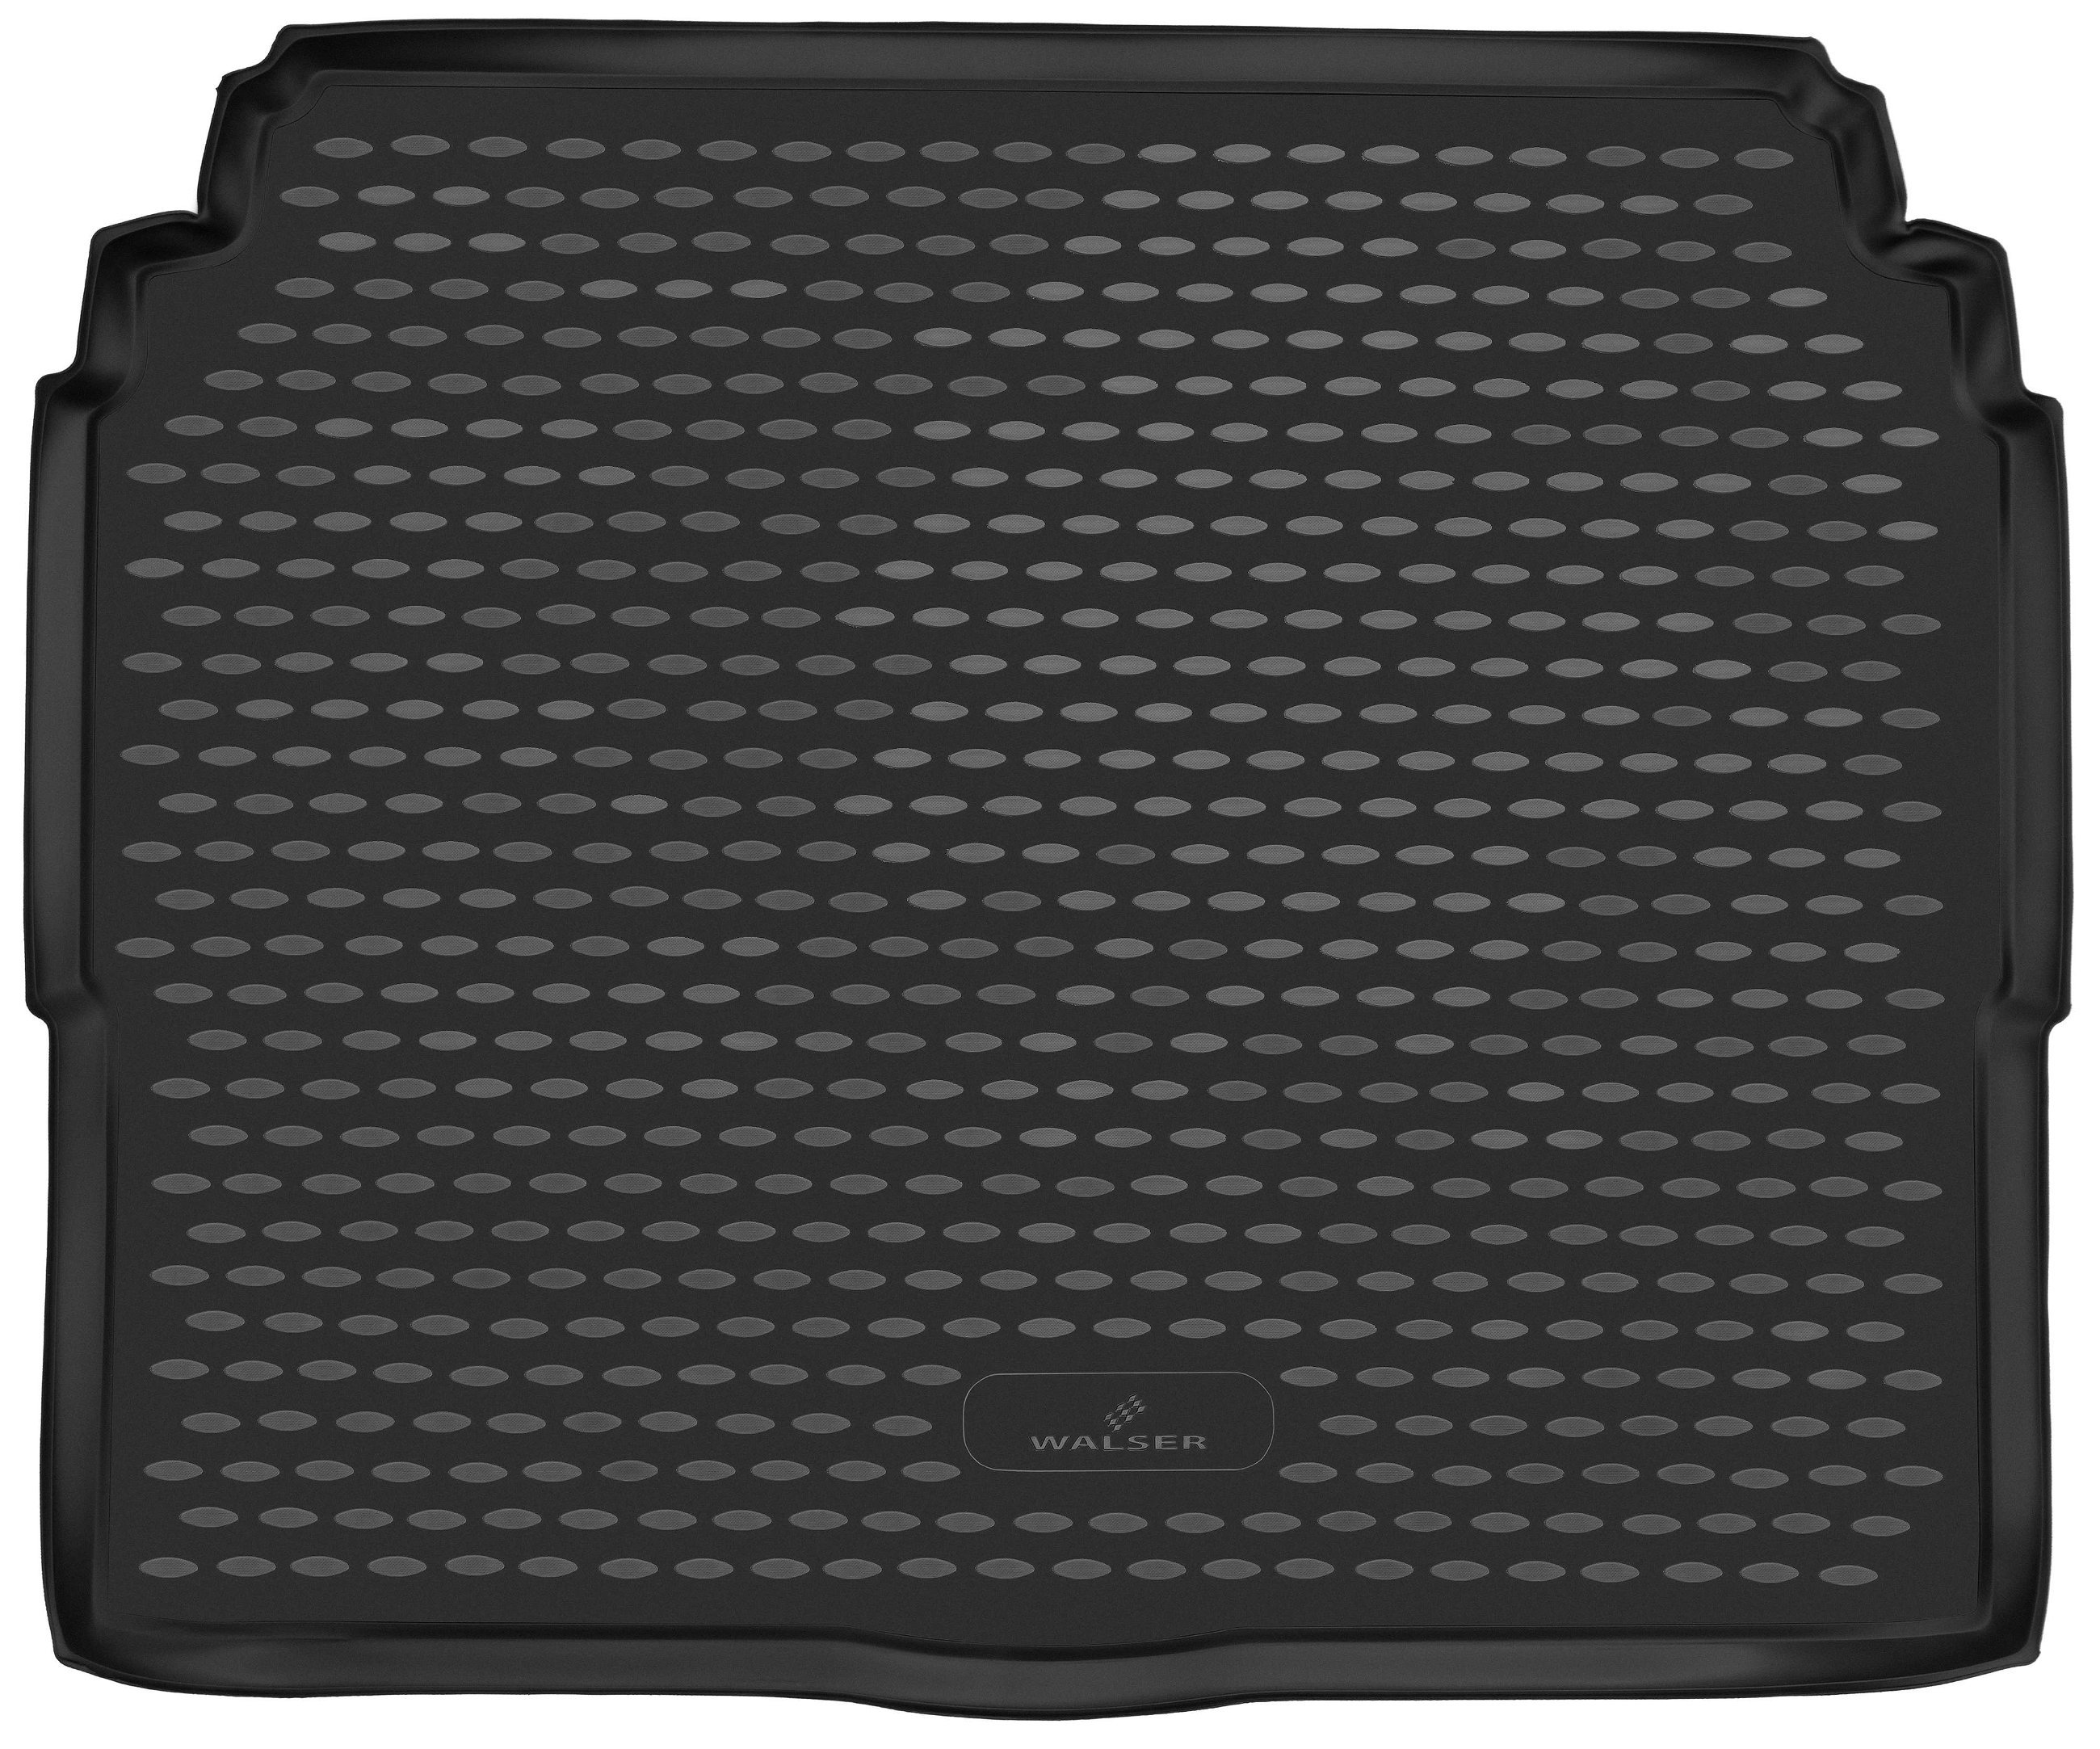 XTR Boot Liner for Peugeot 3008 SUV lower loading floor 05/2016 - Today